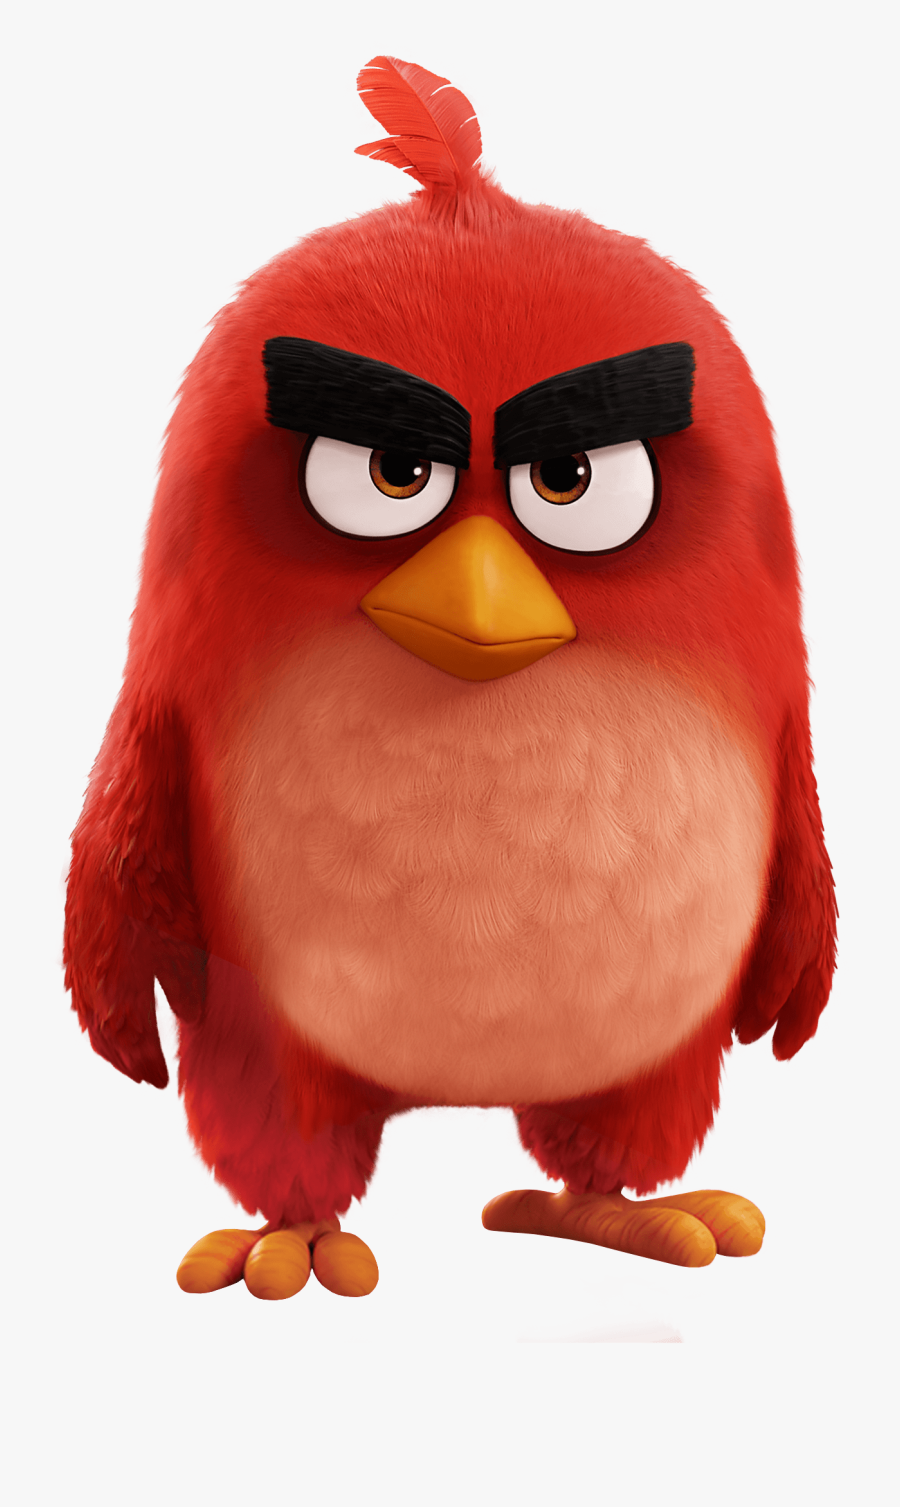 Angry Birds Movie Red Bird - Red Angry Birds 2, Transparent Clipart